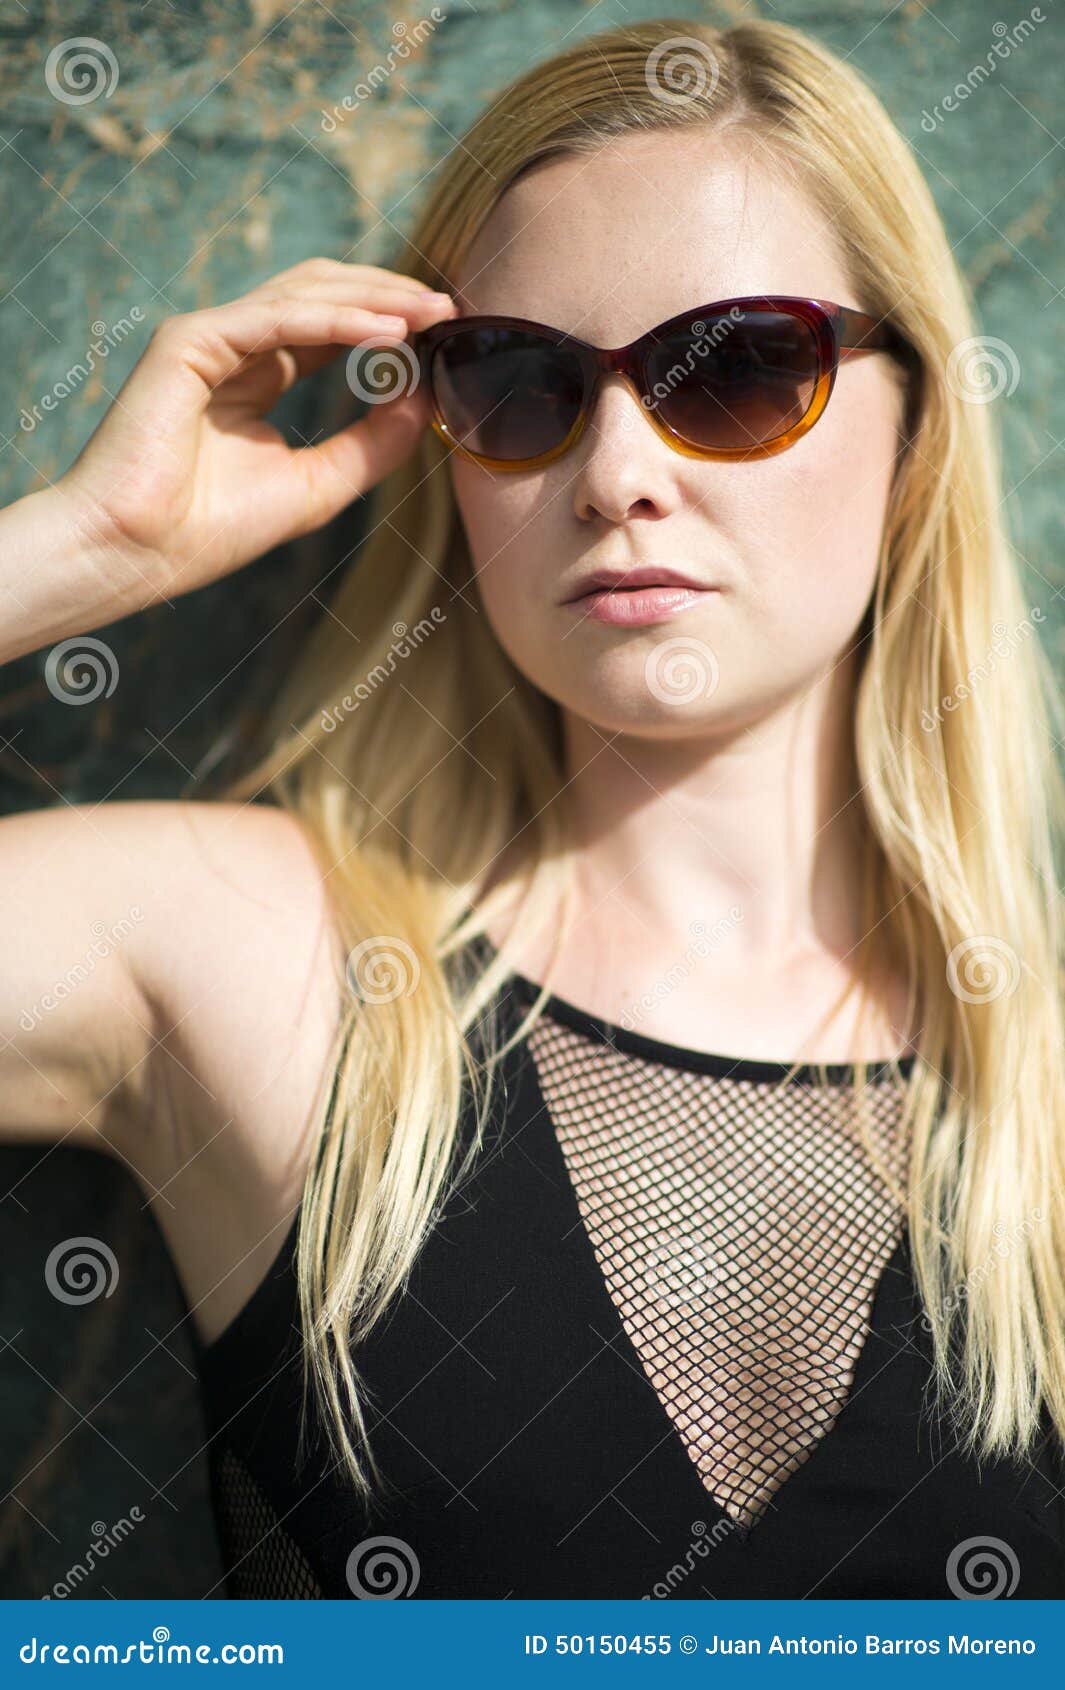 Portrait Of Young Blonde Woman Wearing Sunglasses Stock Image Image Of Blonde Beautiful 50150455 